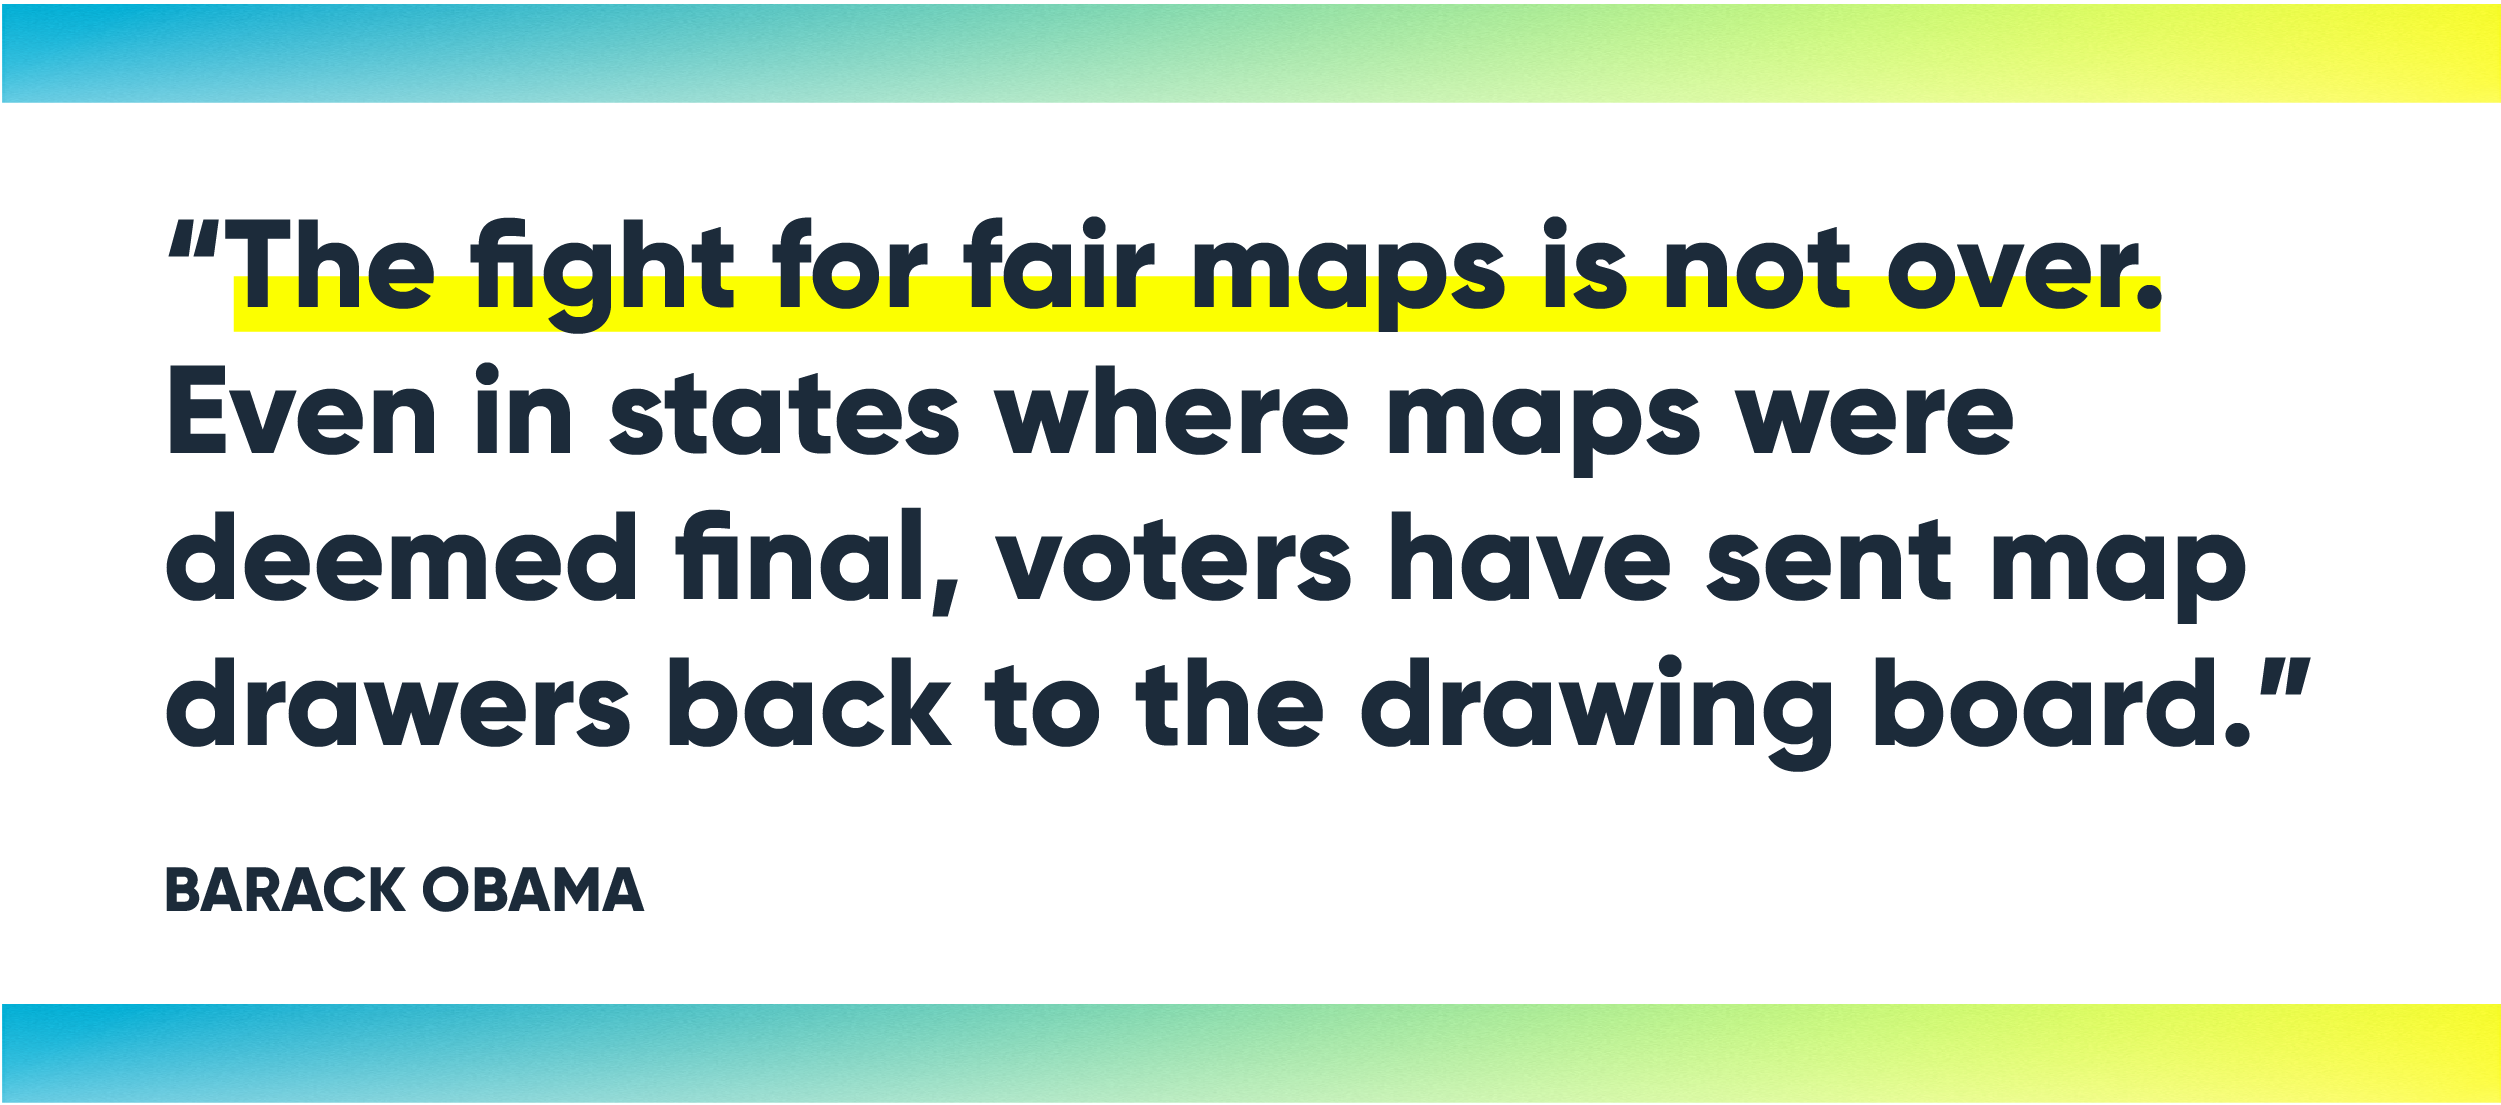 "The fight for fair maps is not over. Even in states where maps were deemed final, voters have sent map drawers back to the drawing board." -- Barack Obama